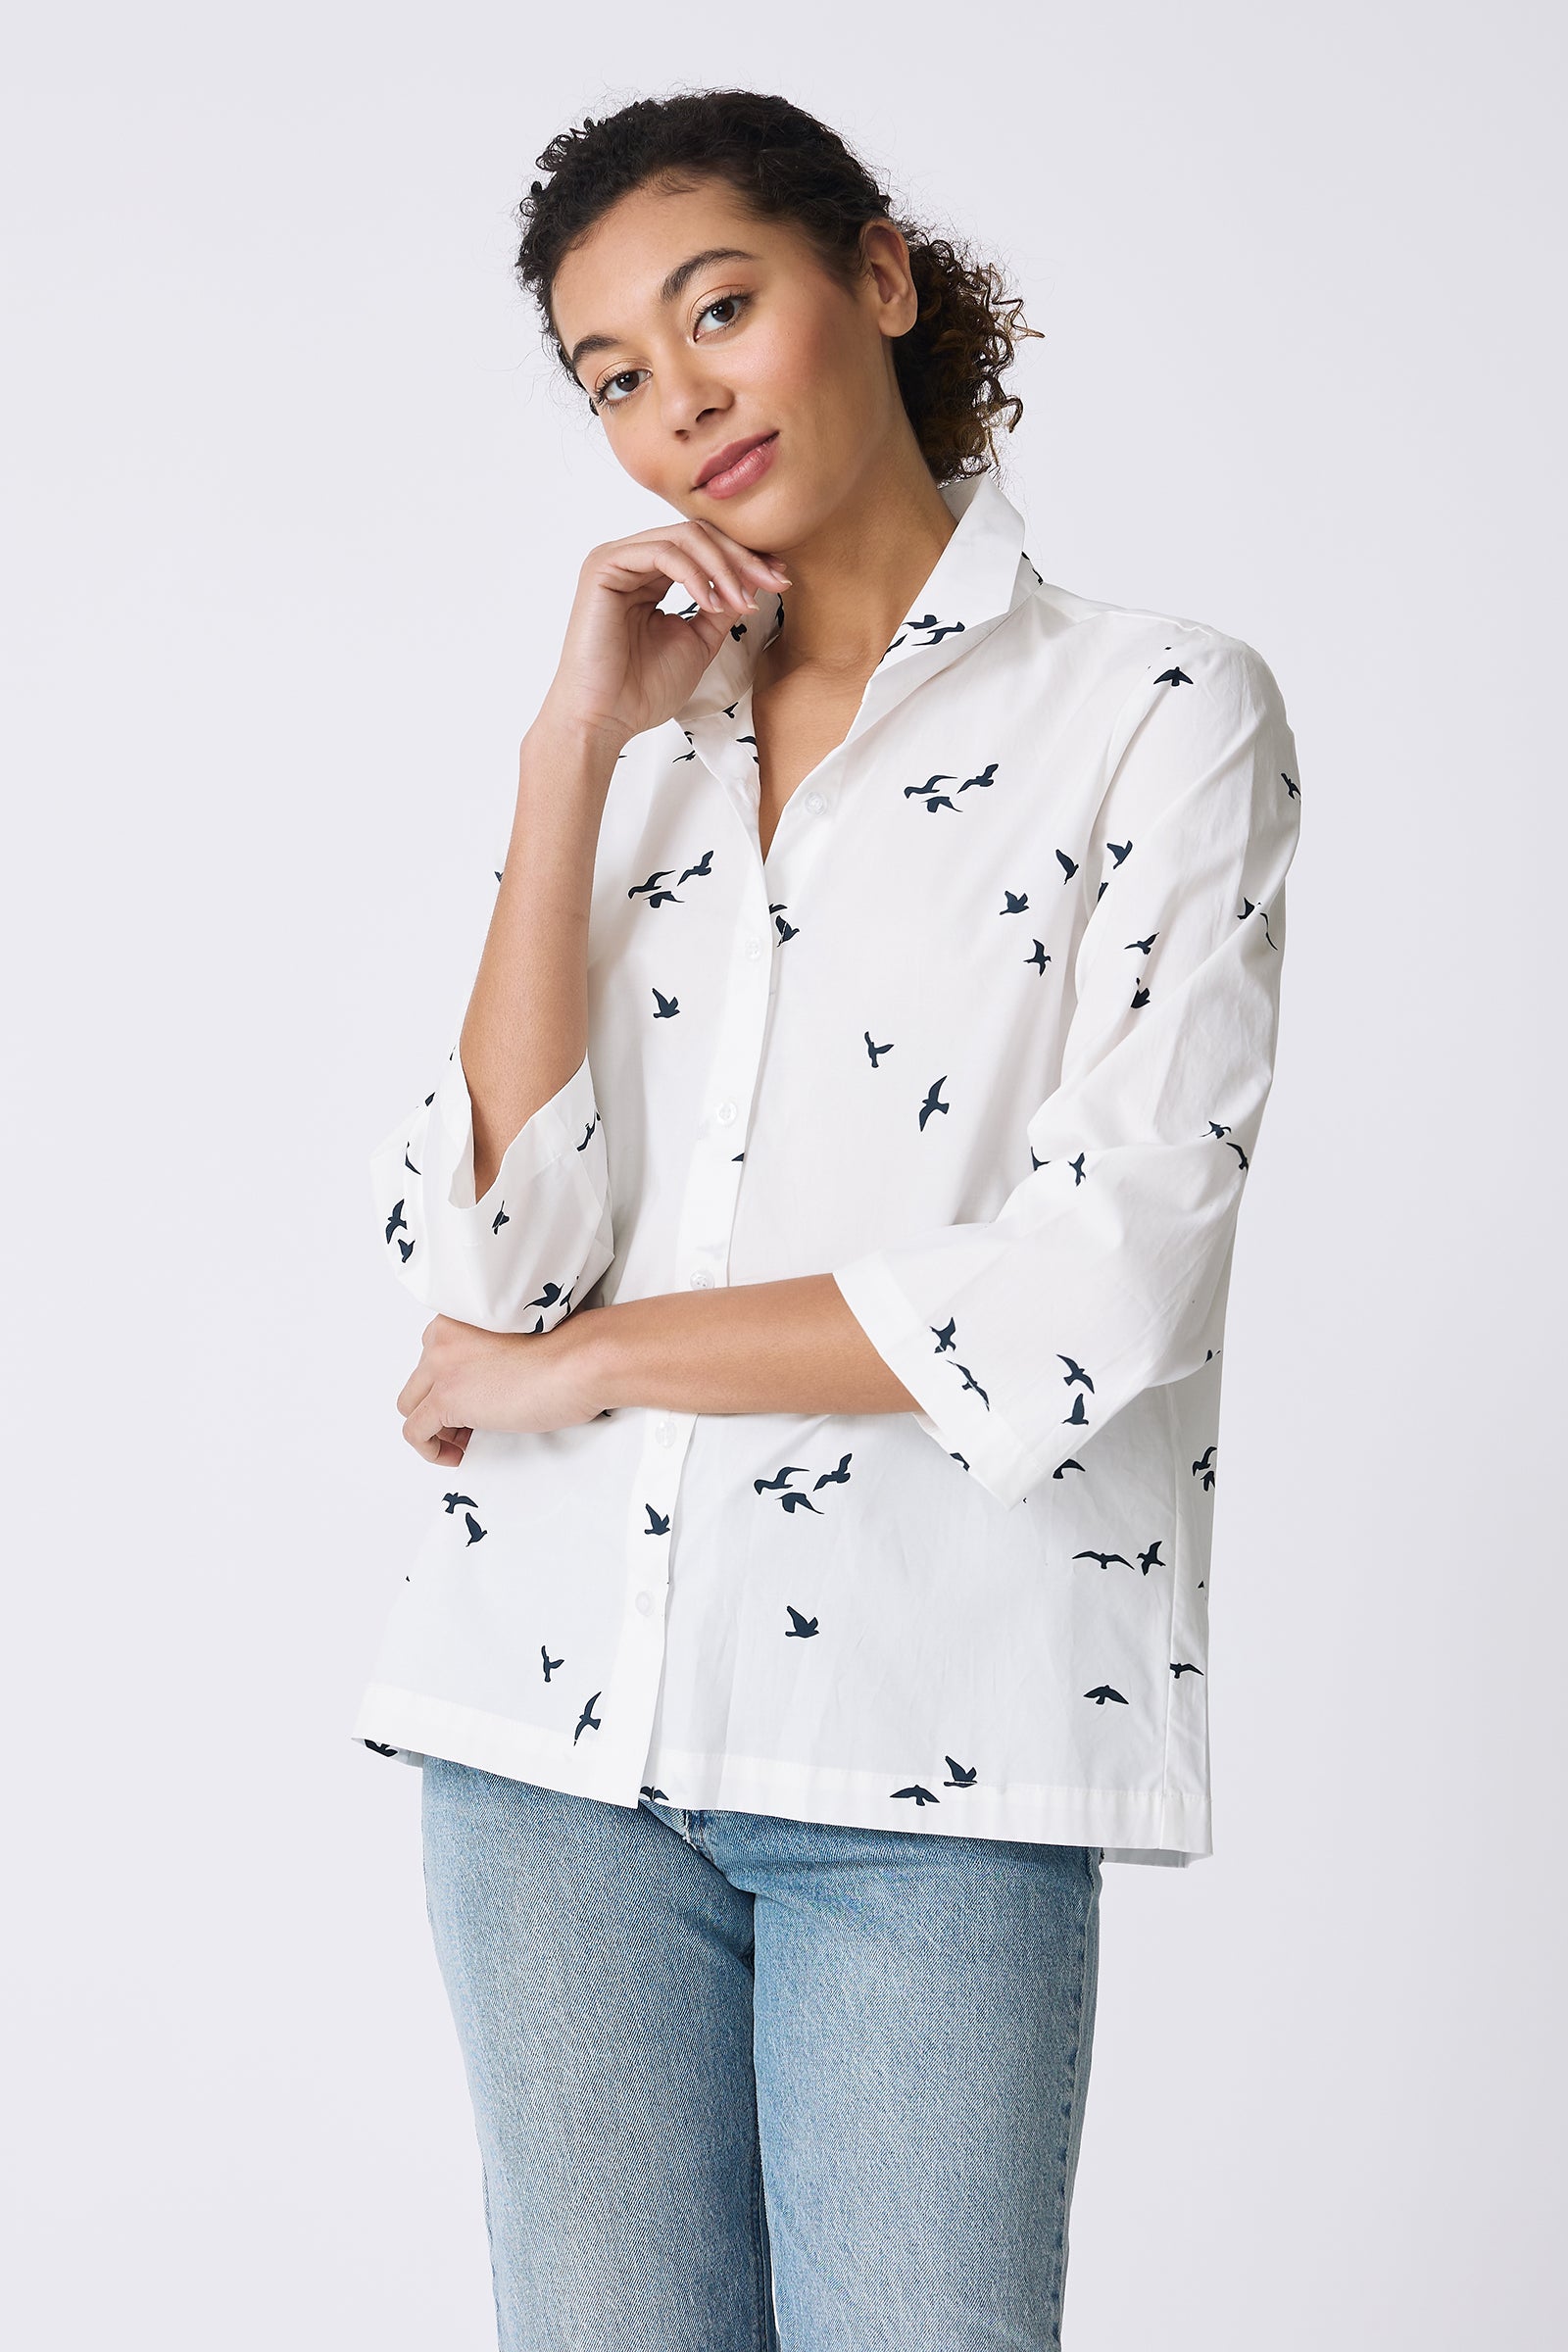 Kal Rieman 3/4 Sleeve Ginna Shirt in White Bird Print on model with hand under chin front view